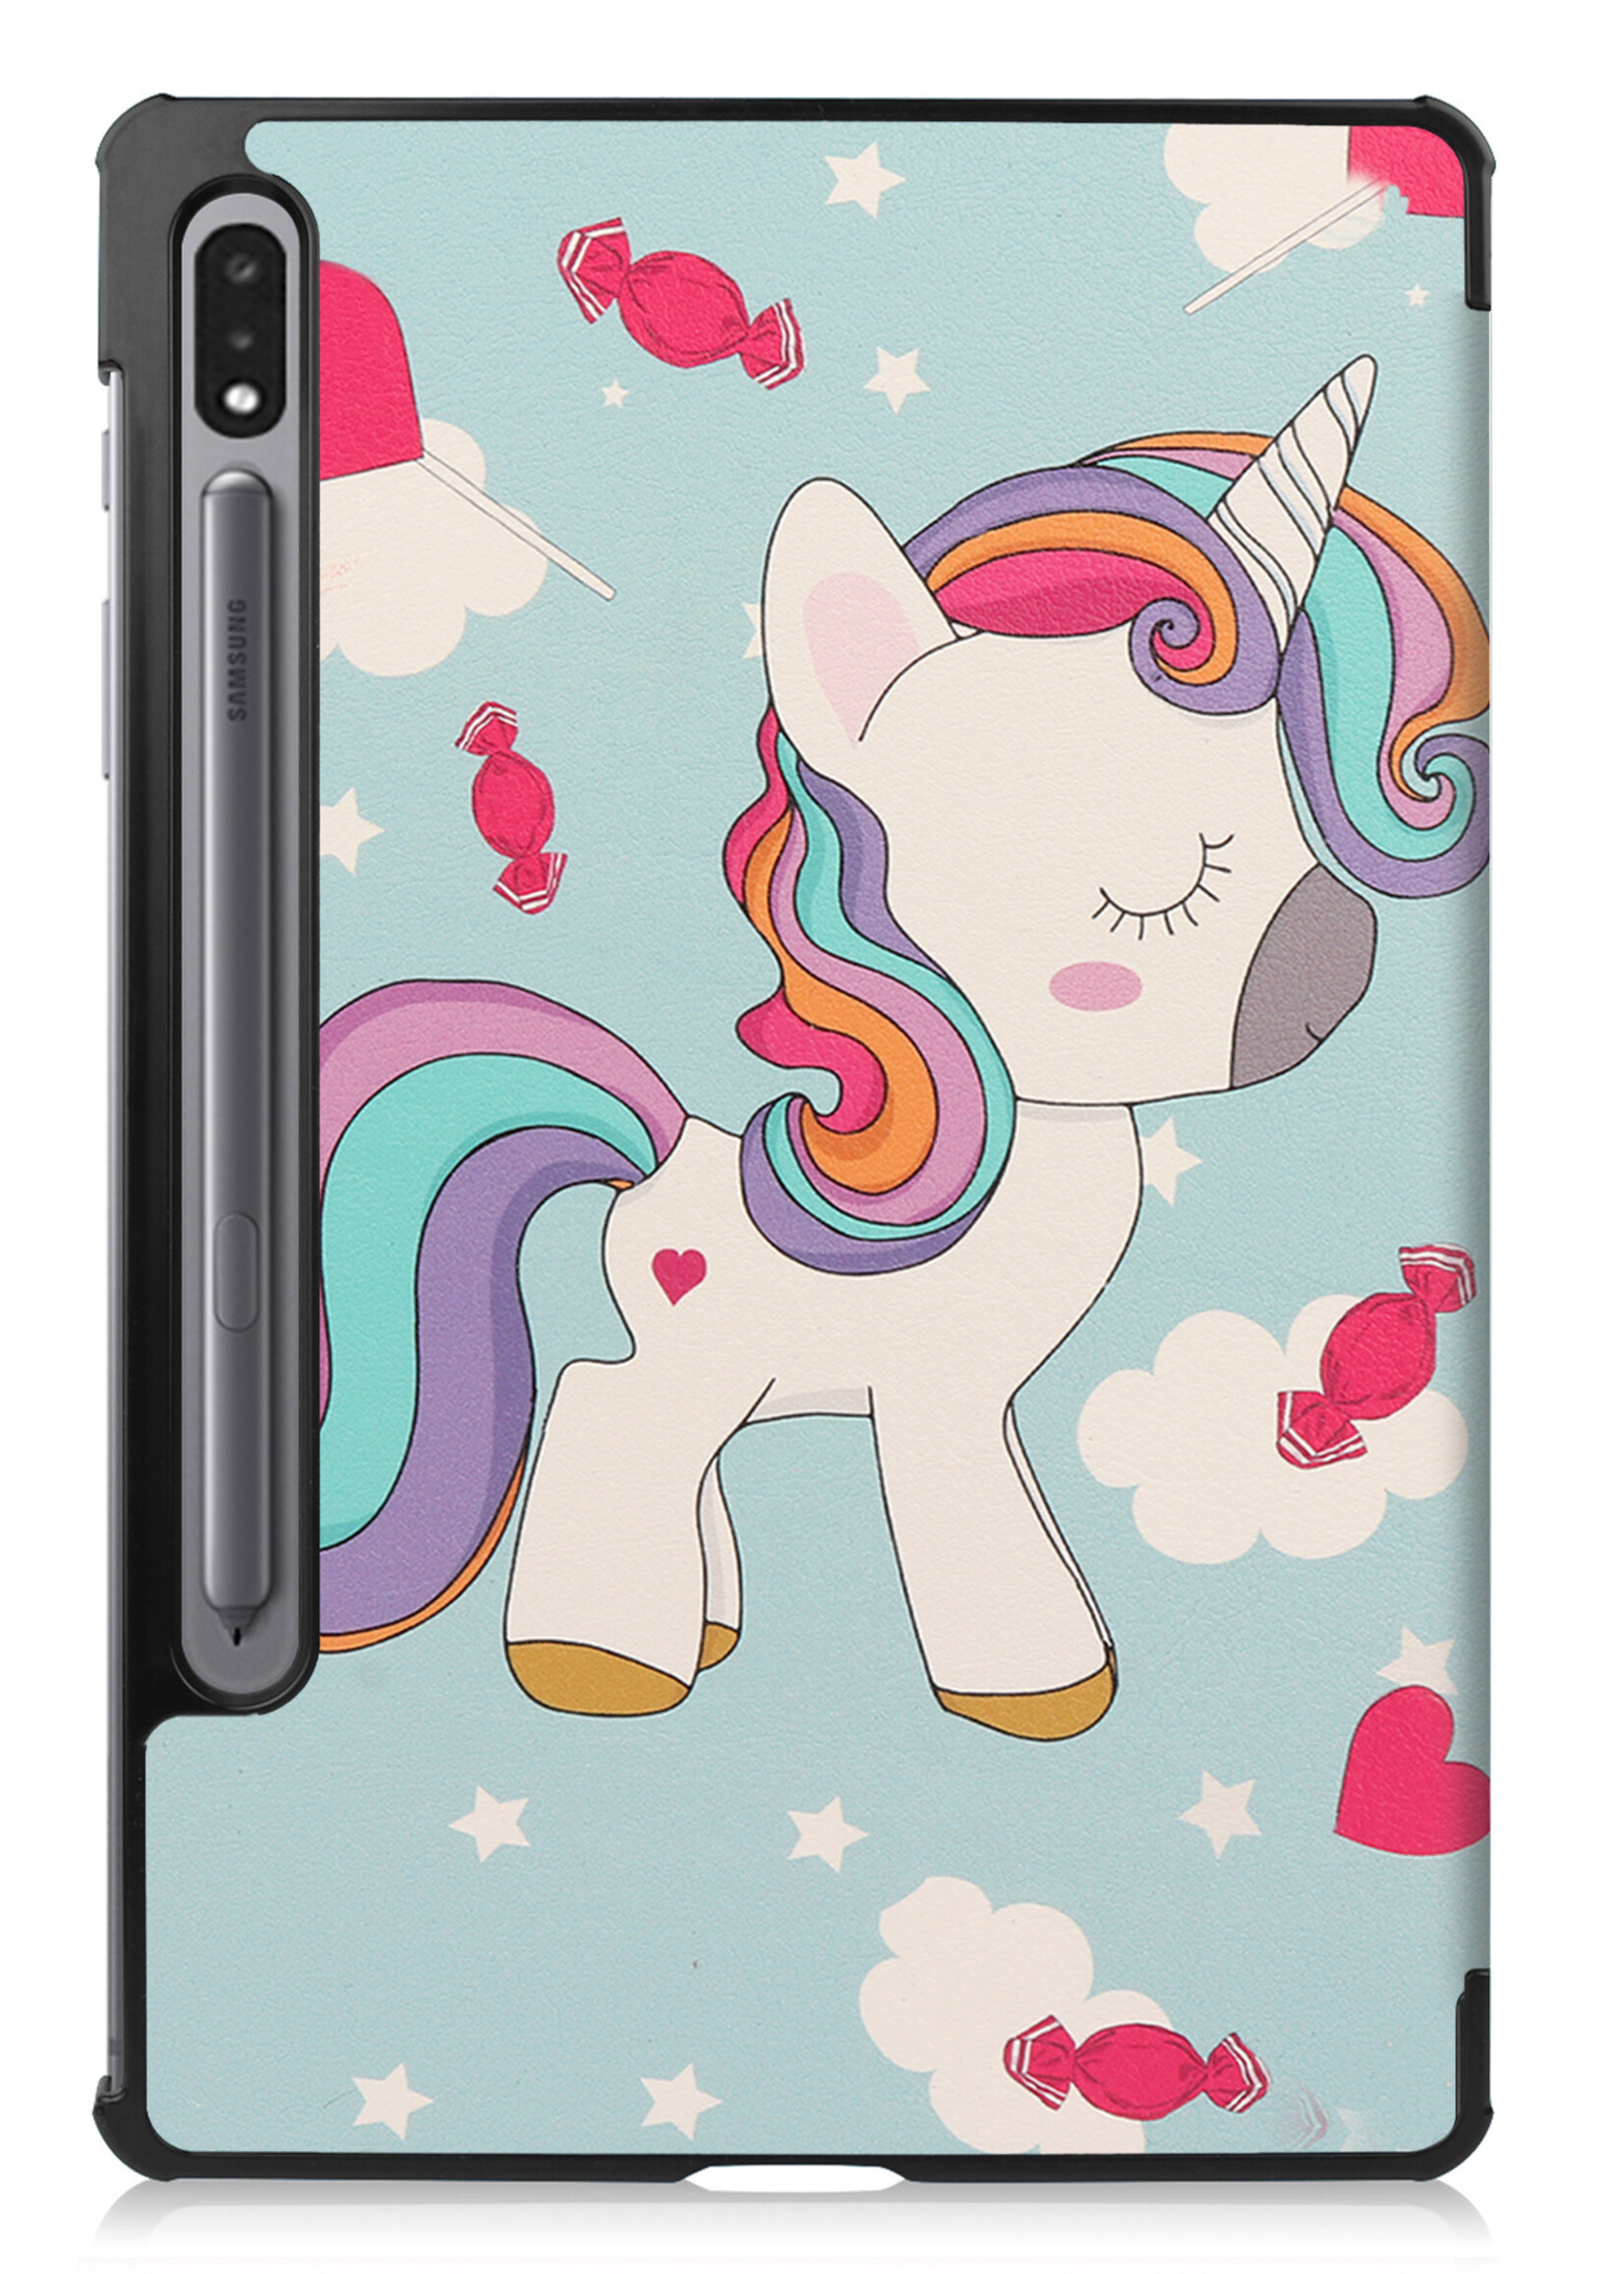 BTH Samsung Tab S8 Ultra Hoes Book Case Hoesje Met S Pen Uitsparing - Samsung Galaxy Tab S8 Ultra Hoesje Cover - Unicorn